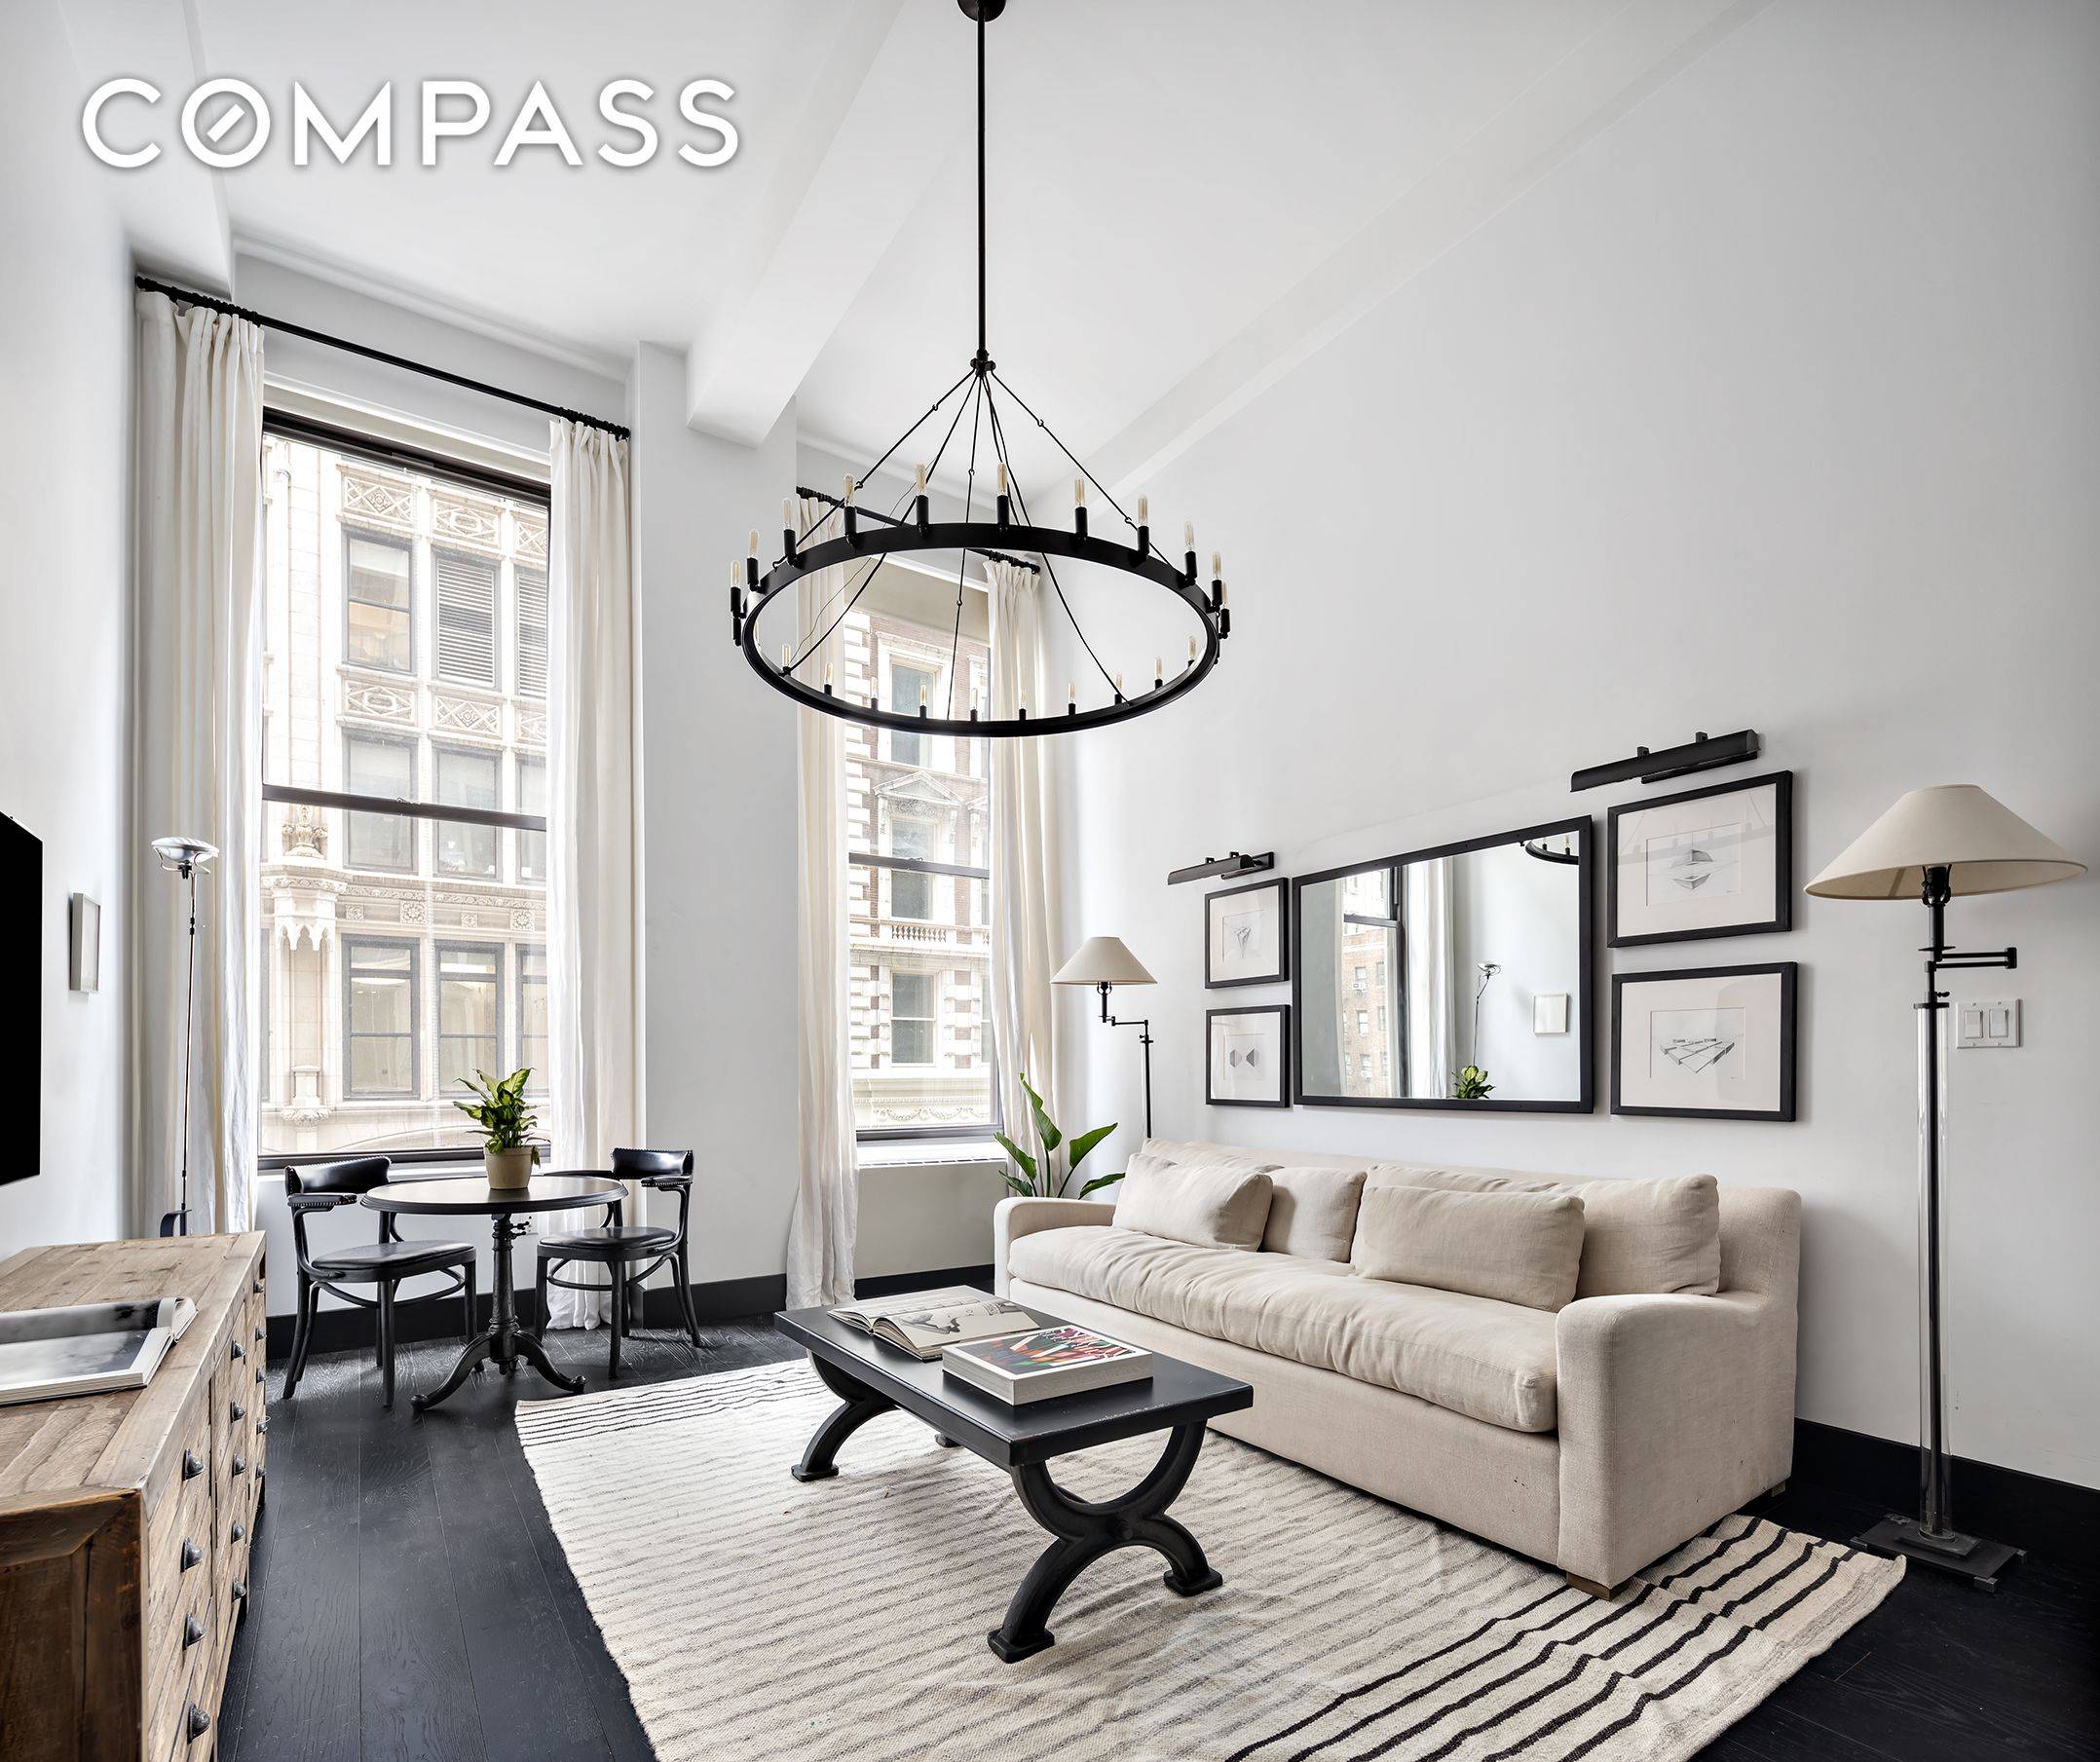 Welcome home to residence 4H at 254 Park Avenue South, a unique 716 square foot one bedroom loft with 14 foot ceilings and oversized picture windows overlooking 20th street in ...